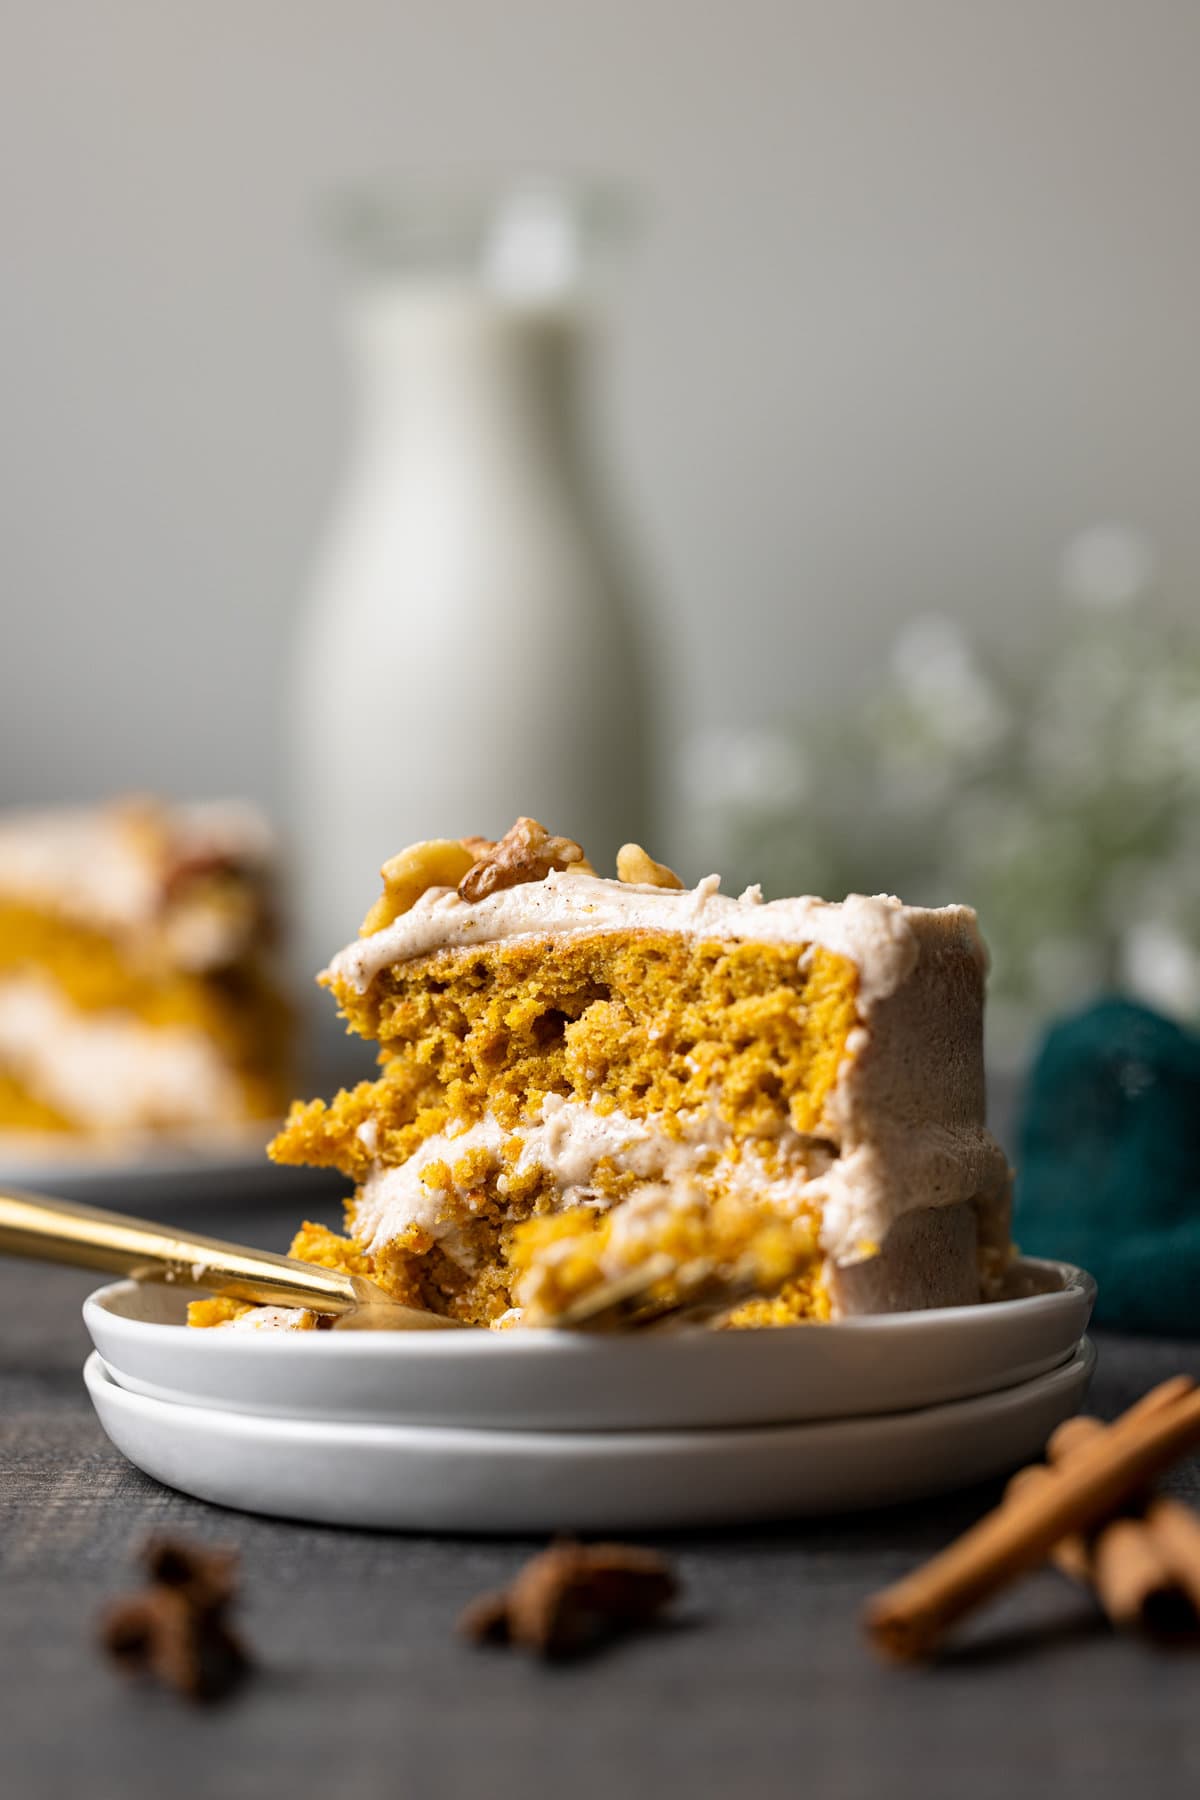 Slice of Carrot Cake with Chai Buttercream